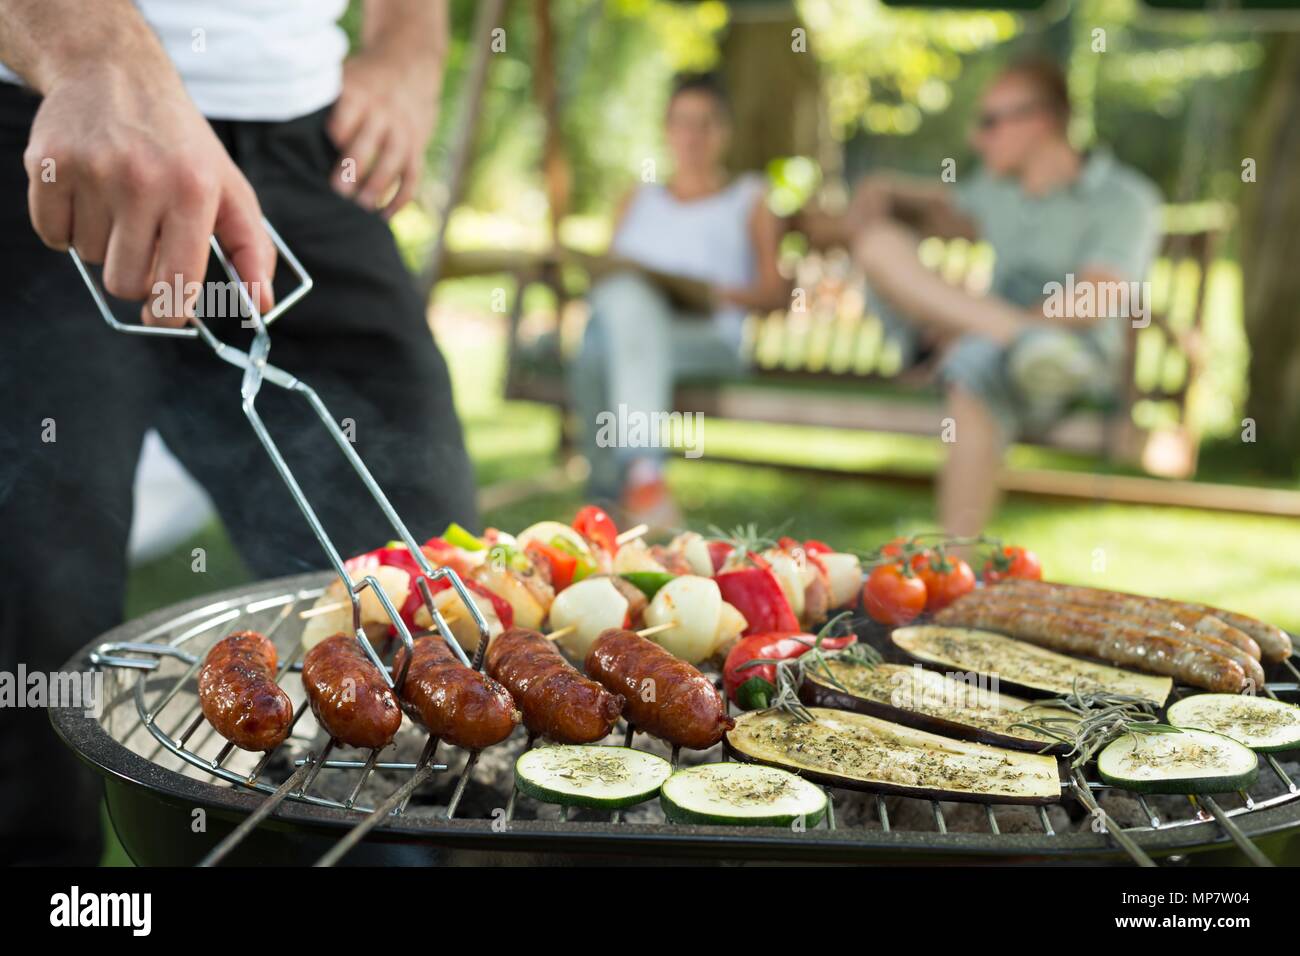 Grilling sausages and vegetables on bbq party Stock Photo